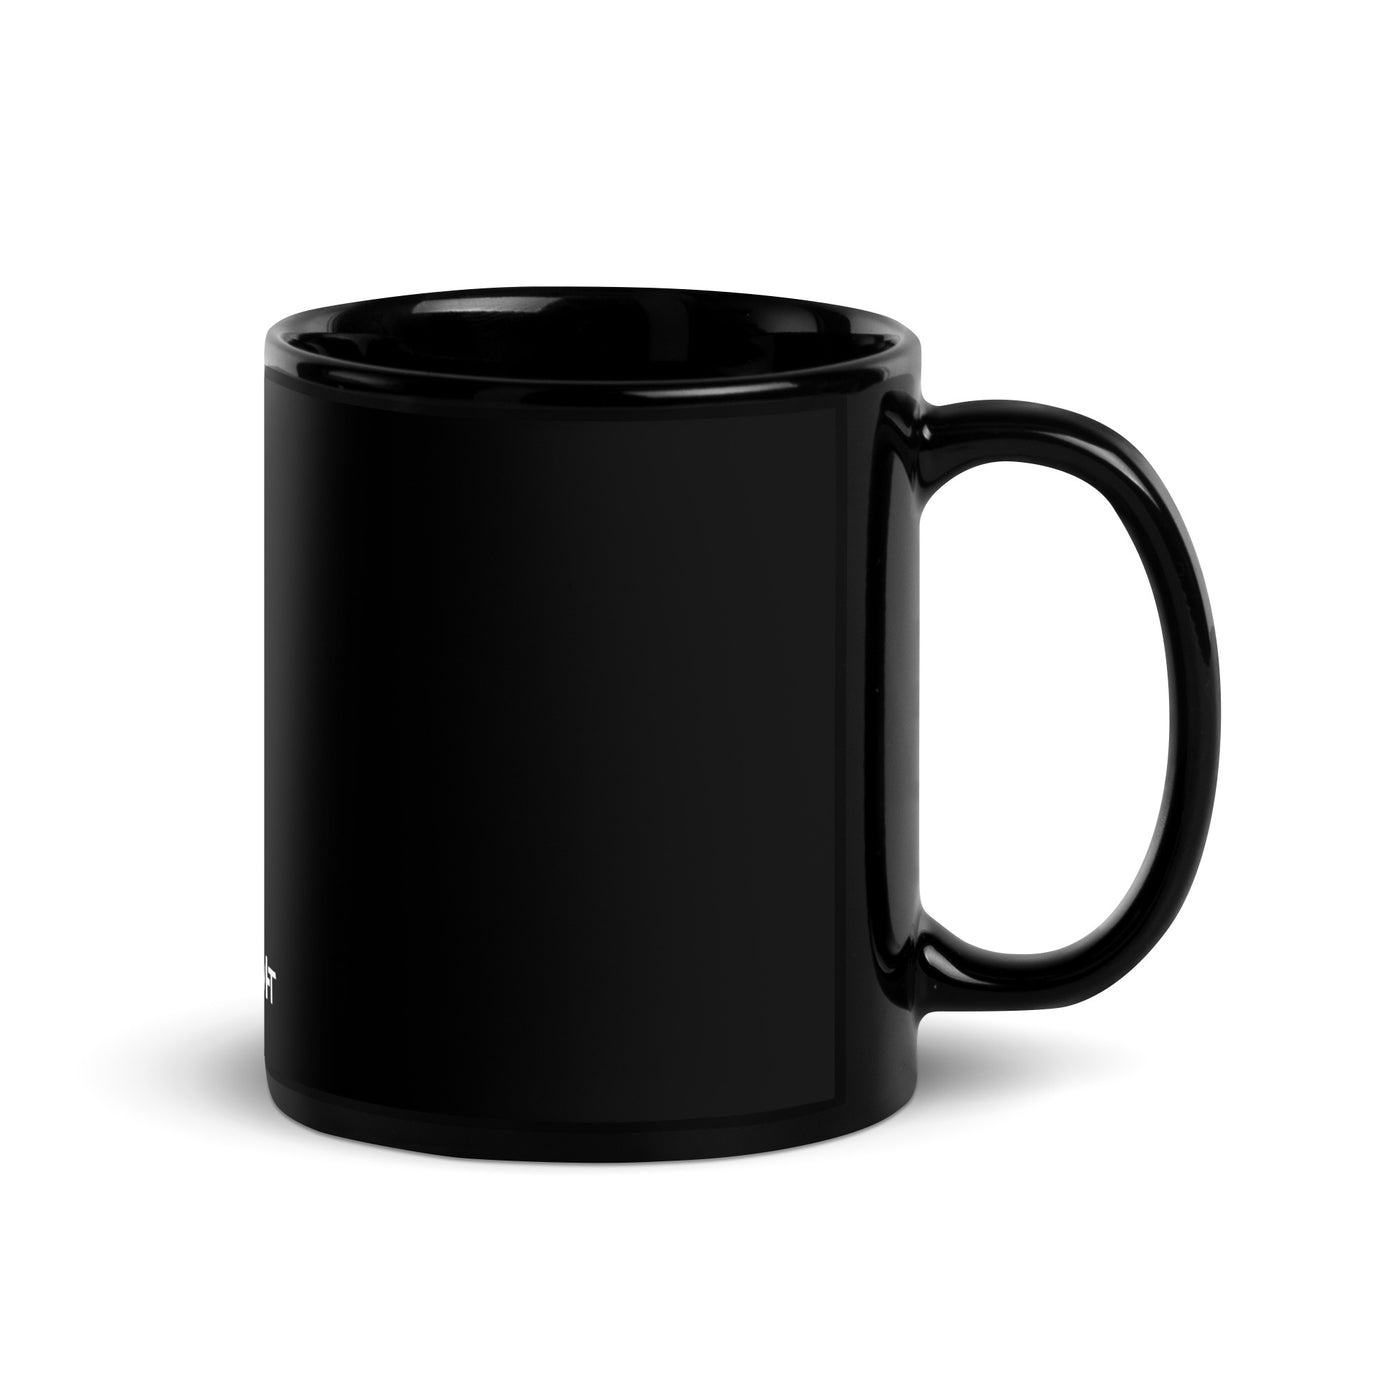 I guess you could say I am pretty familiar with the Bitcoin - Black Glossy Mug